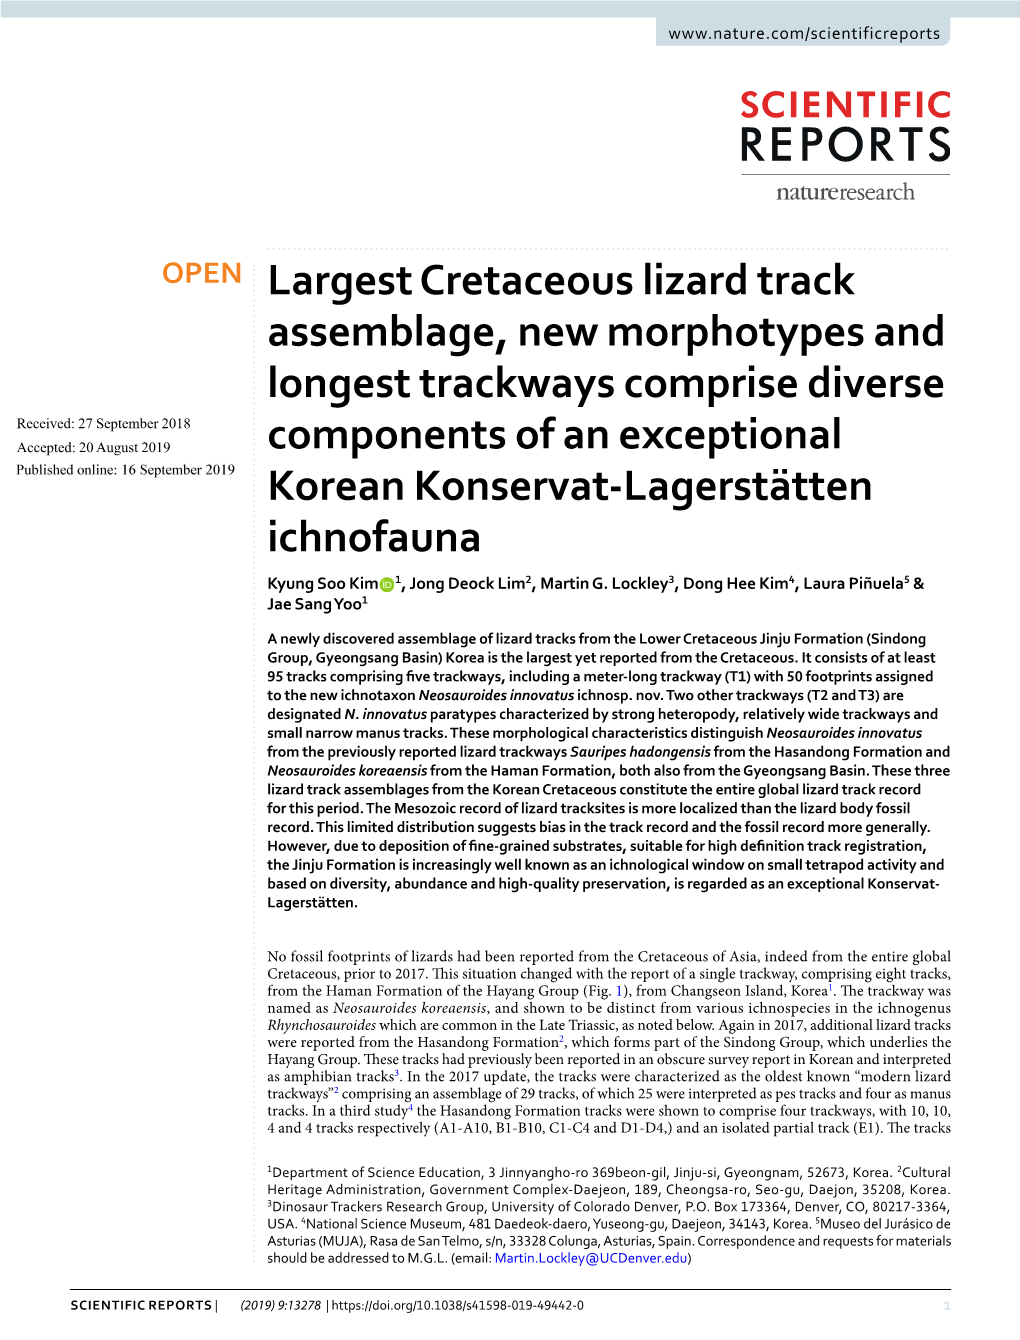 Largest Cretaceous Lizard Track Assemblage, New Morphotypes And